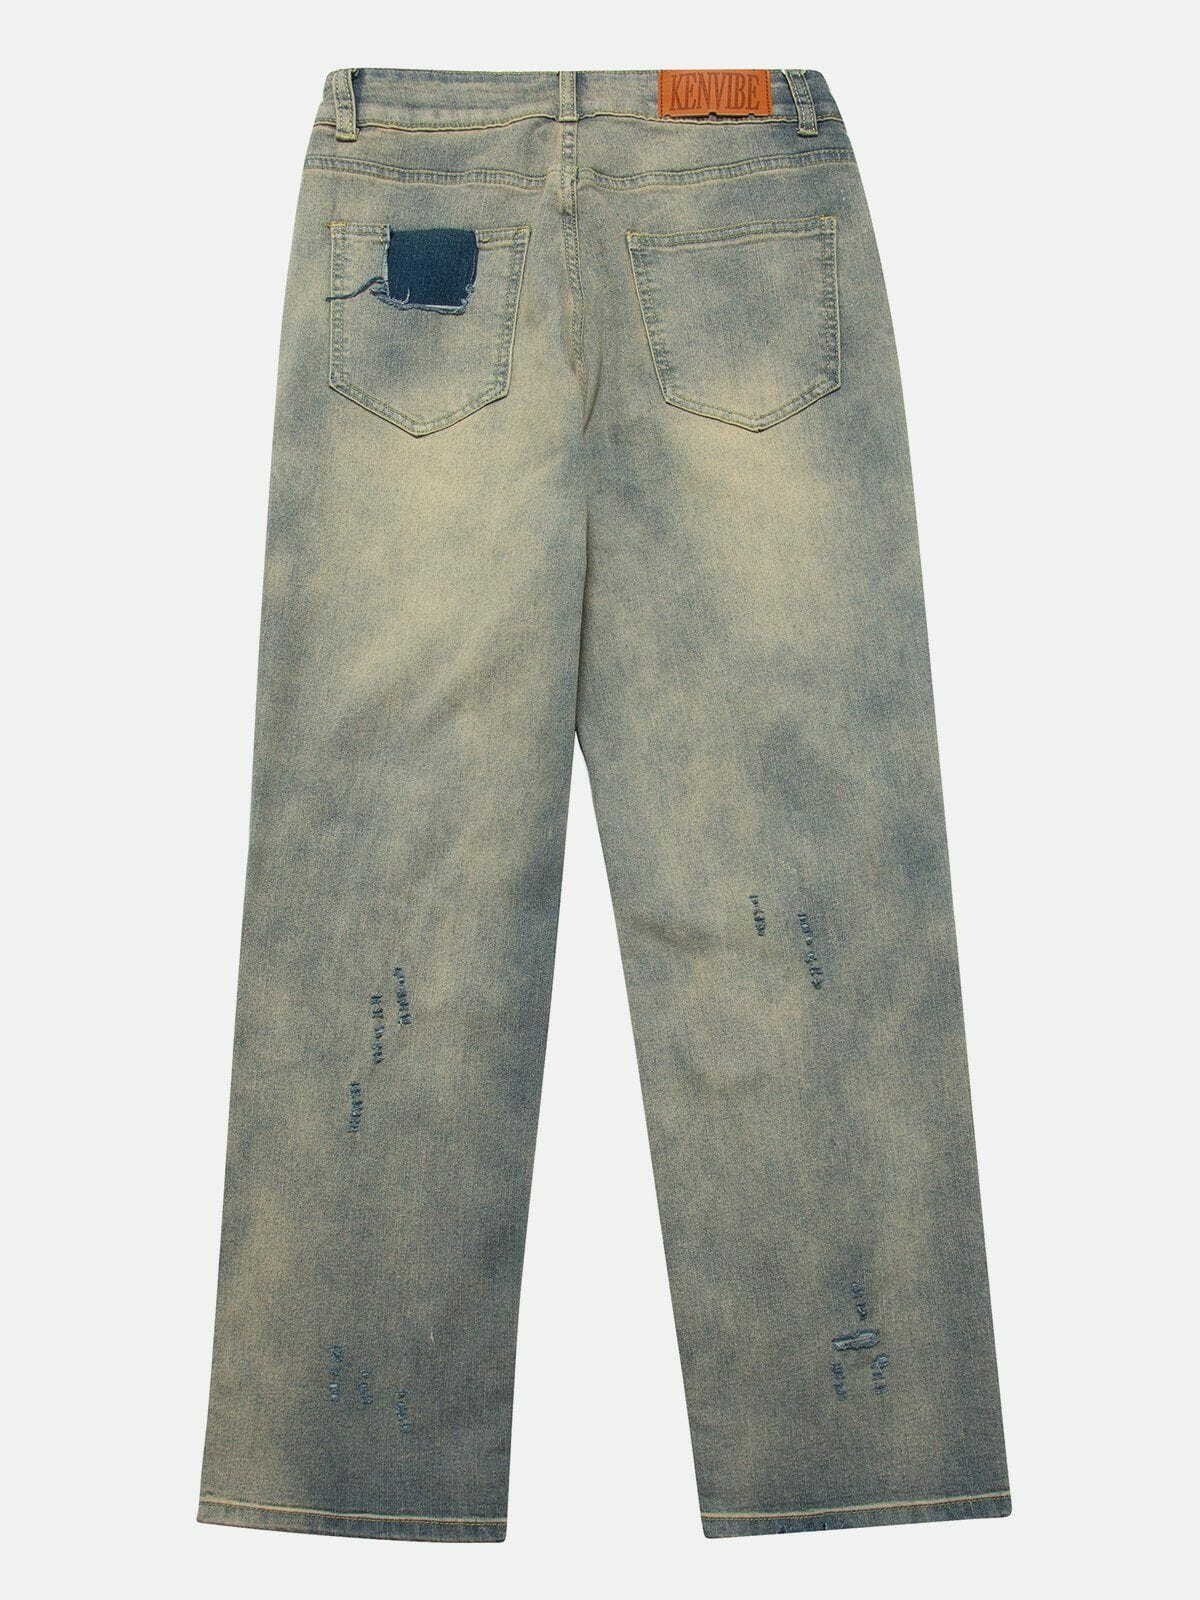 washed hole jeans edgy & retro streetwear 5975